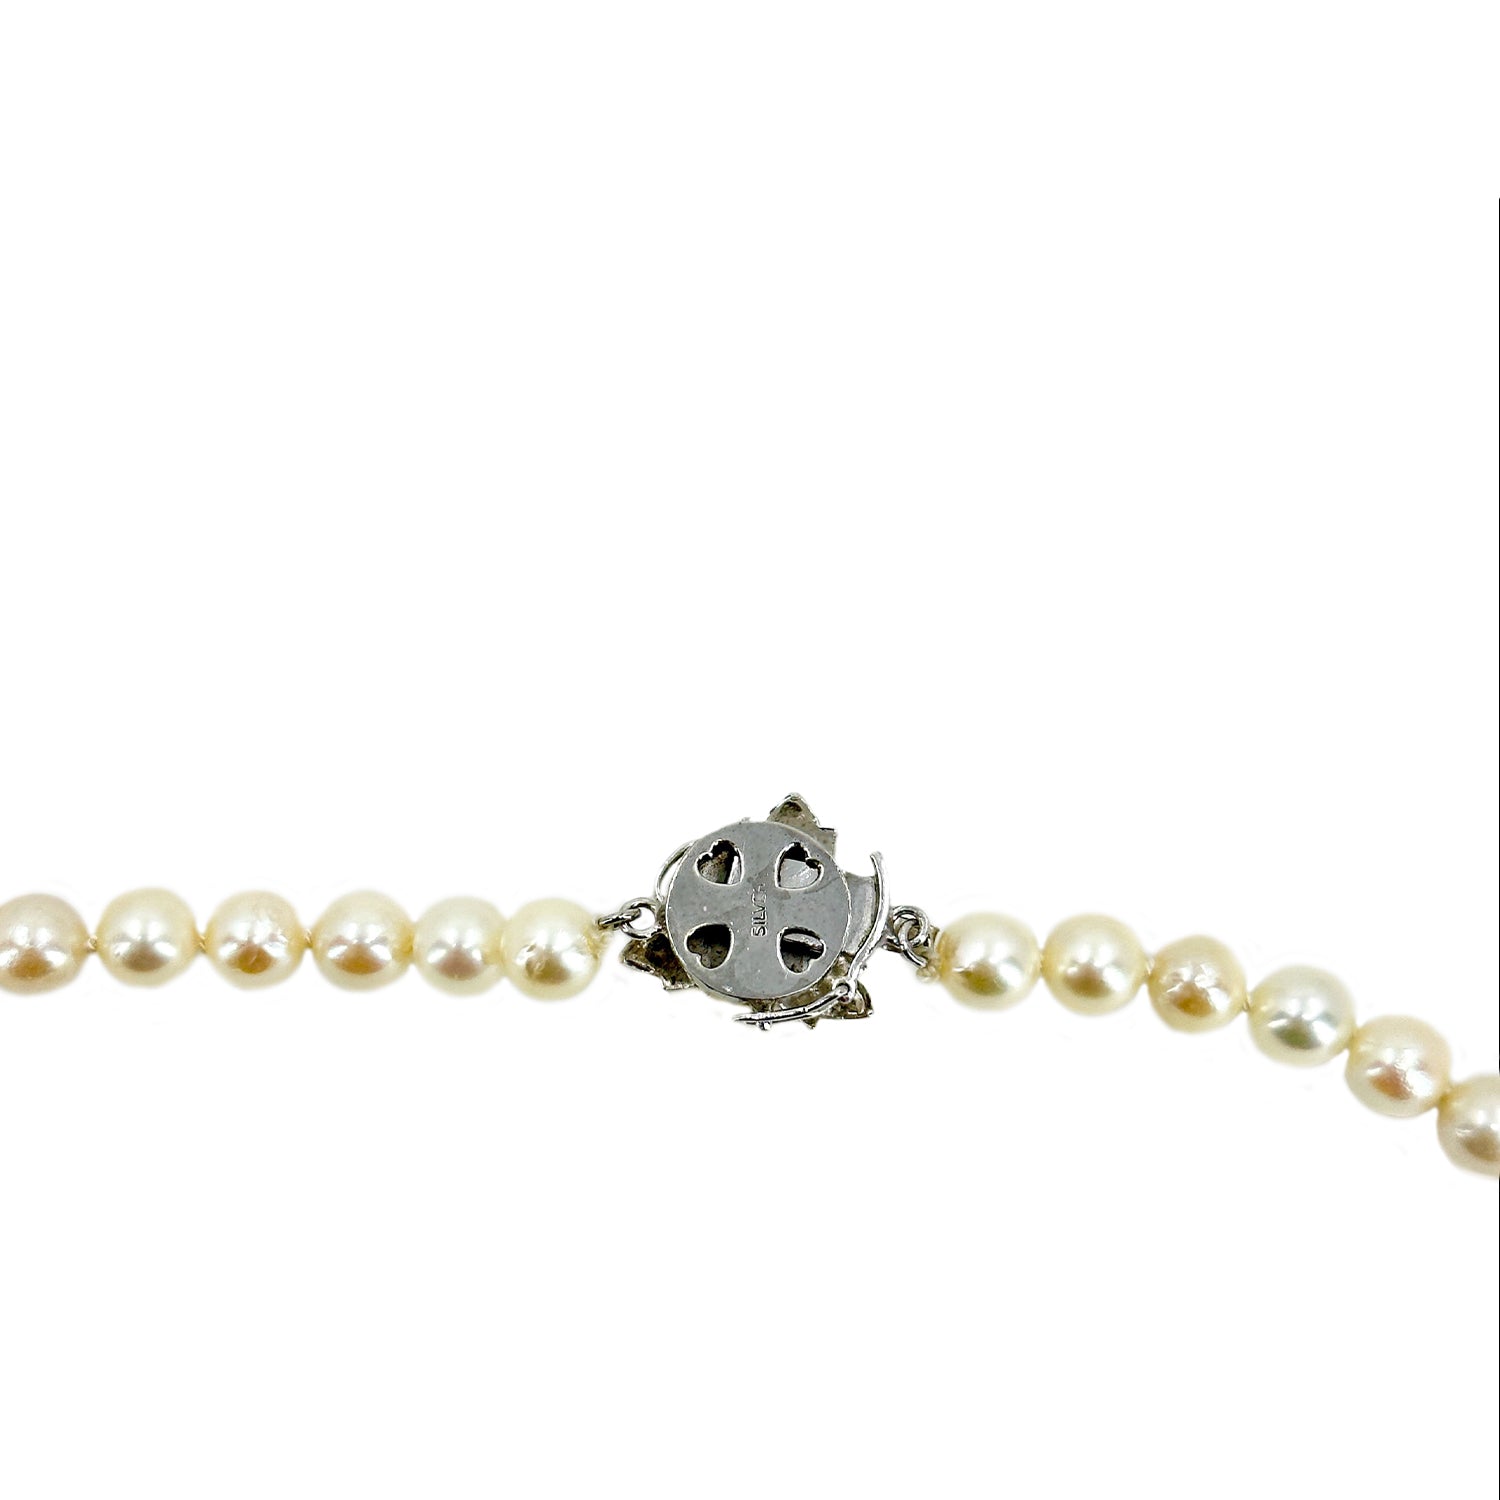 Opera Length Mid-Century Japanese Saltwater Cultured Akoya Pearl Vintage Necklace - Sterling Silver 33 Inch